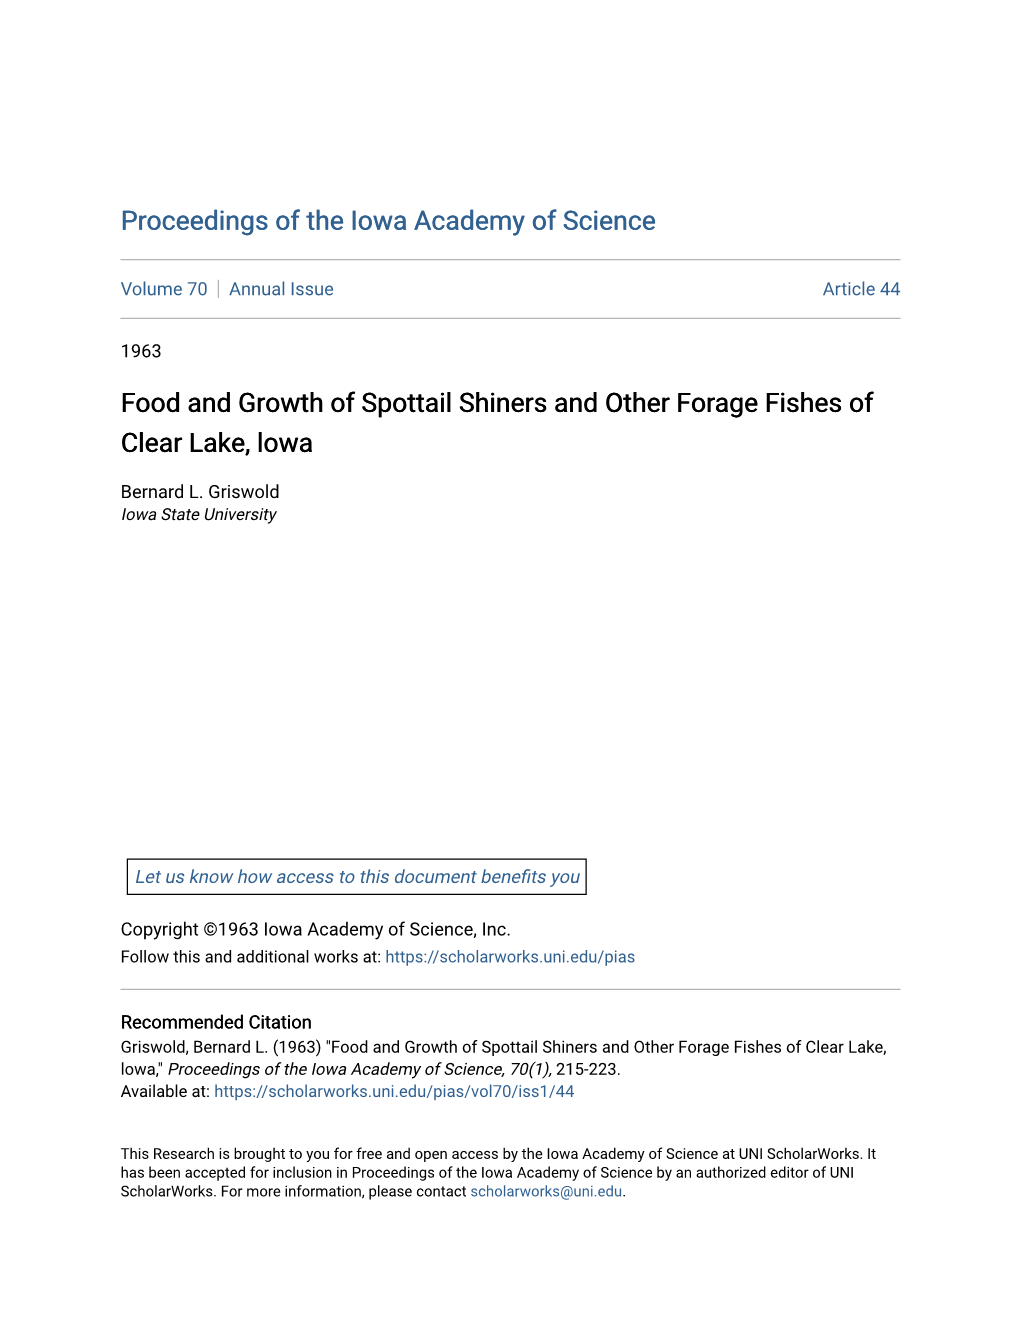 Food and Growth of Spottail Shiners and Other Forage Fishes of Clear Lake, Lowa